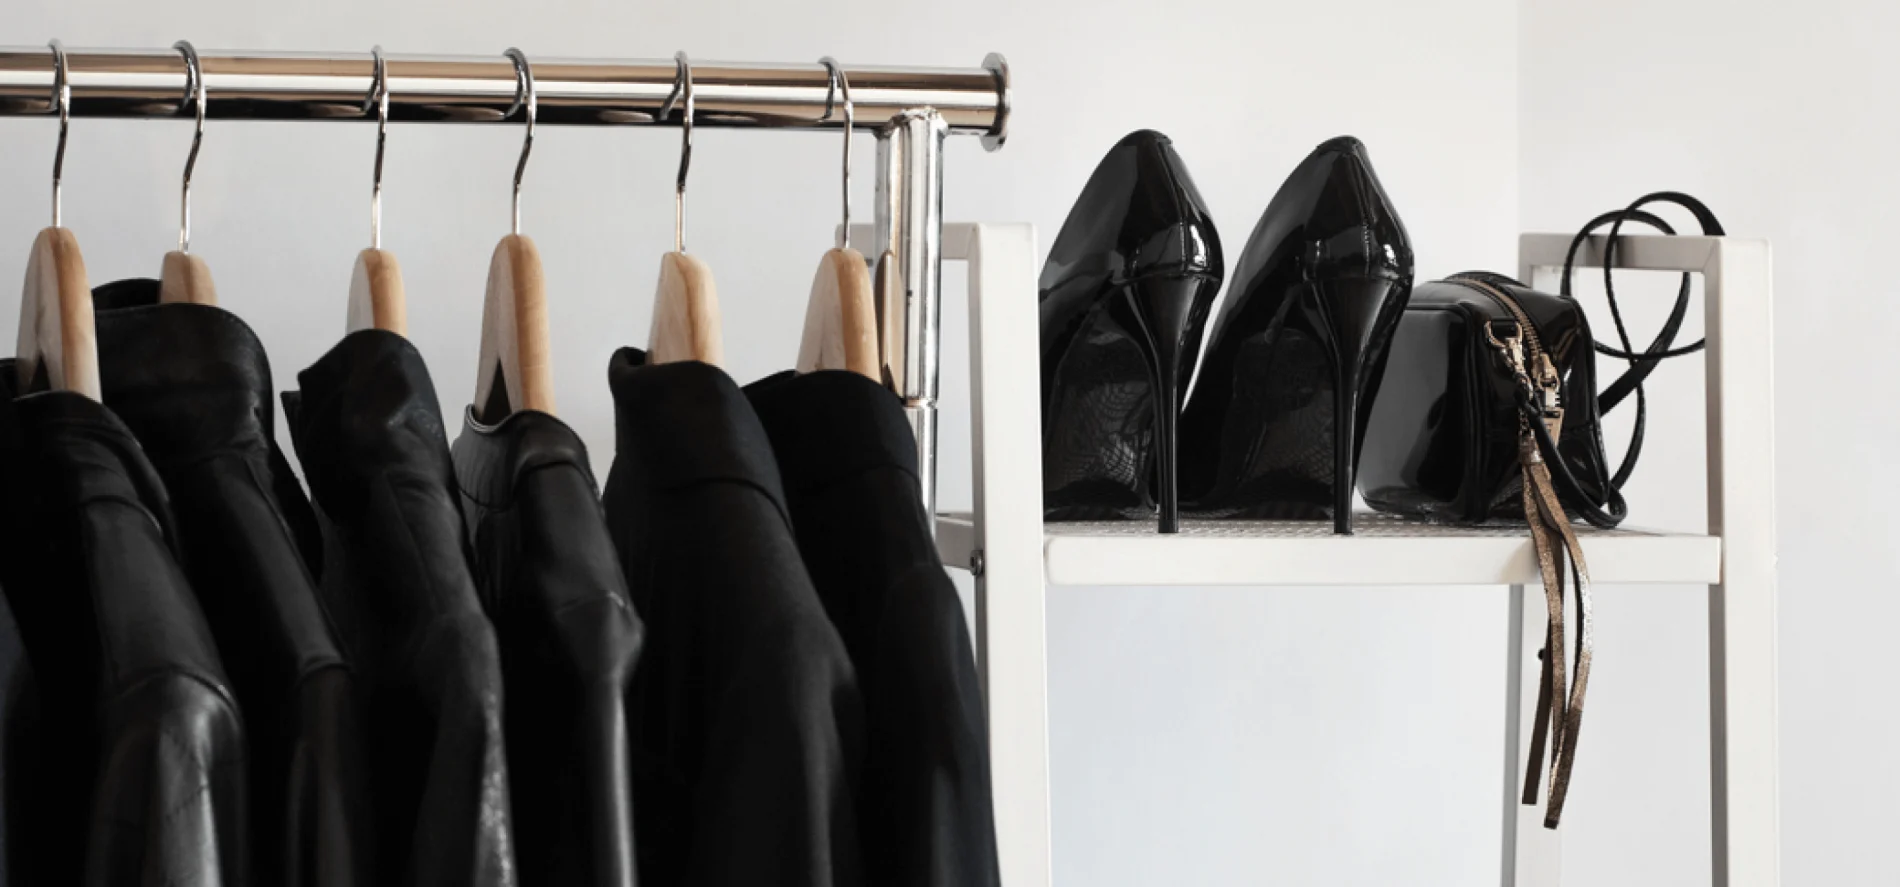 Image of black clothing on wooden hangers and high heeled shoes on a rack